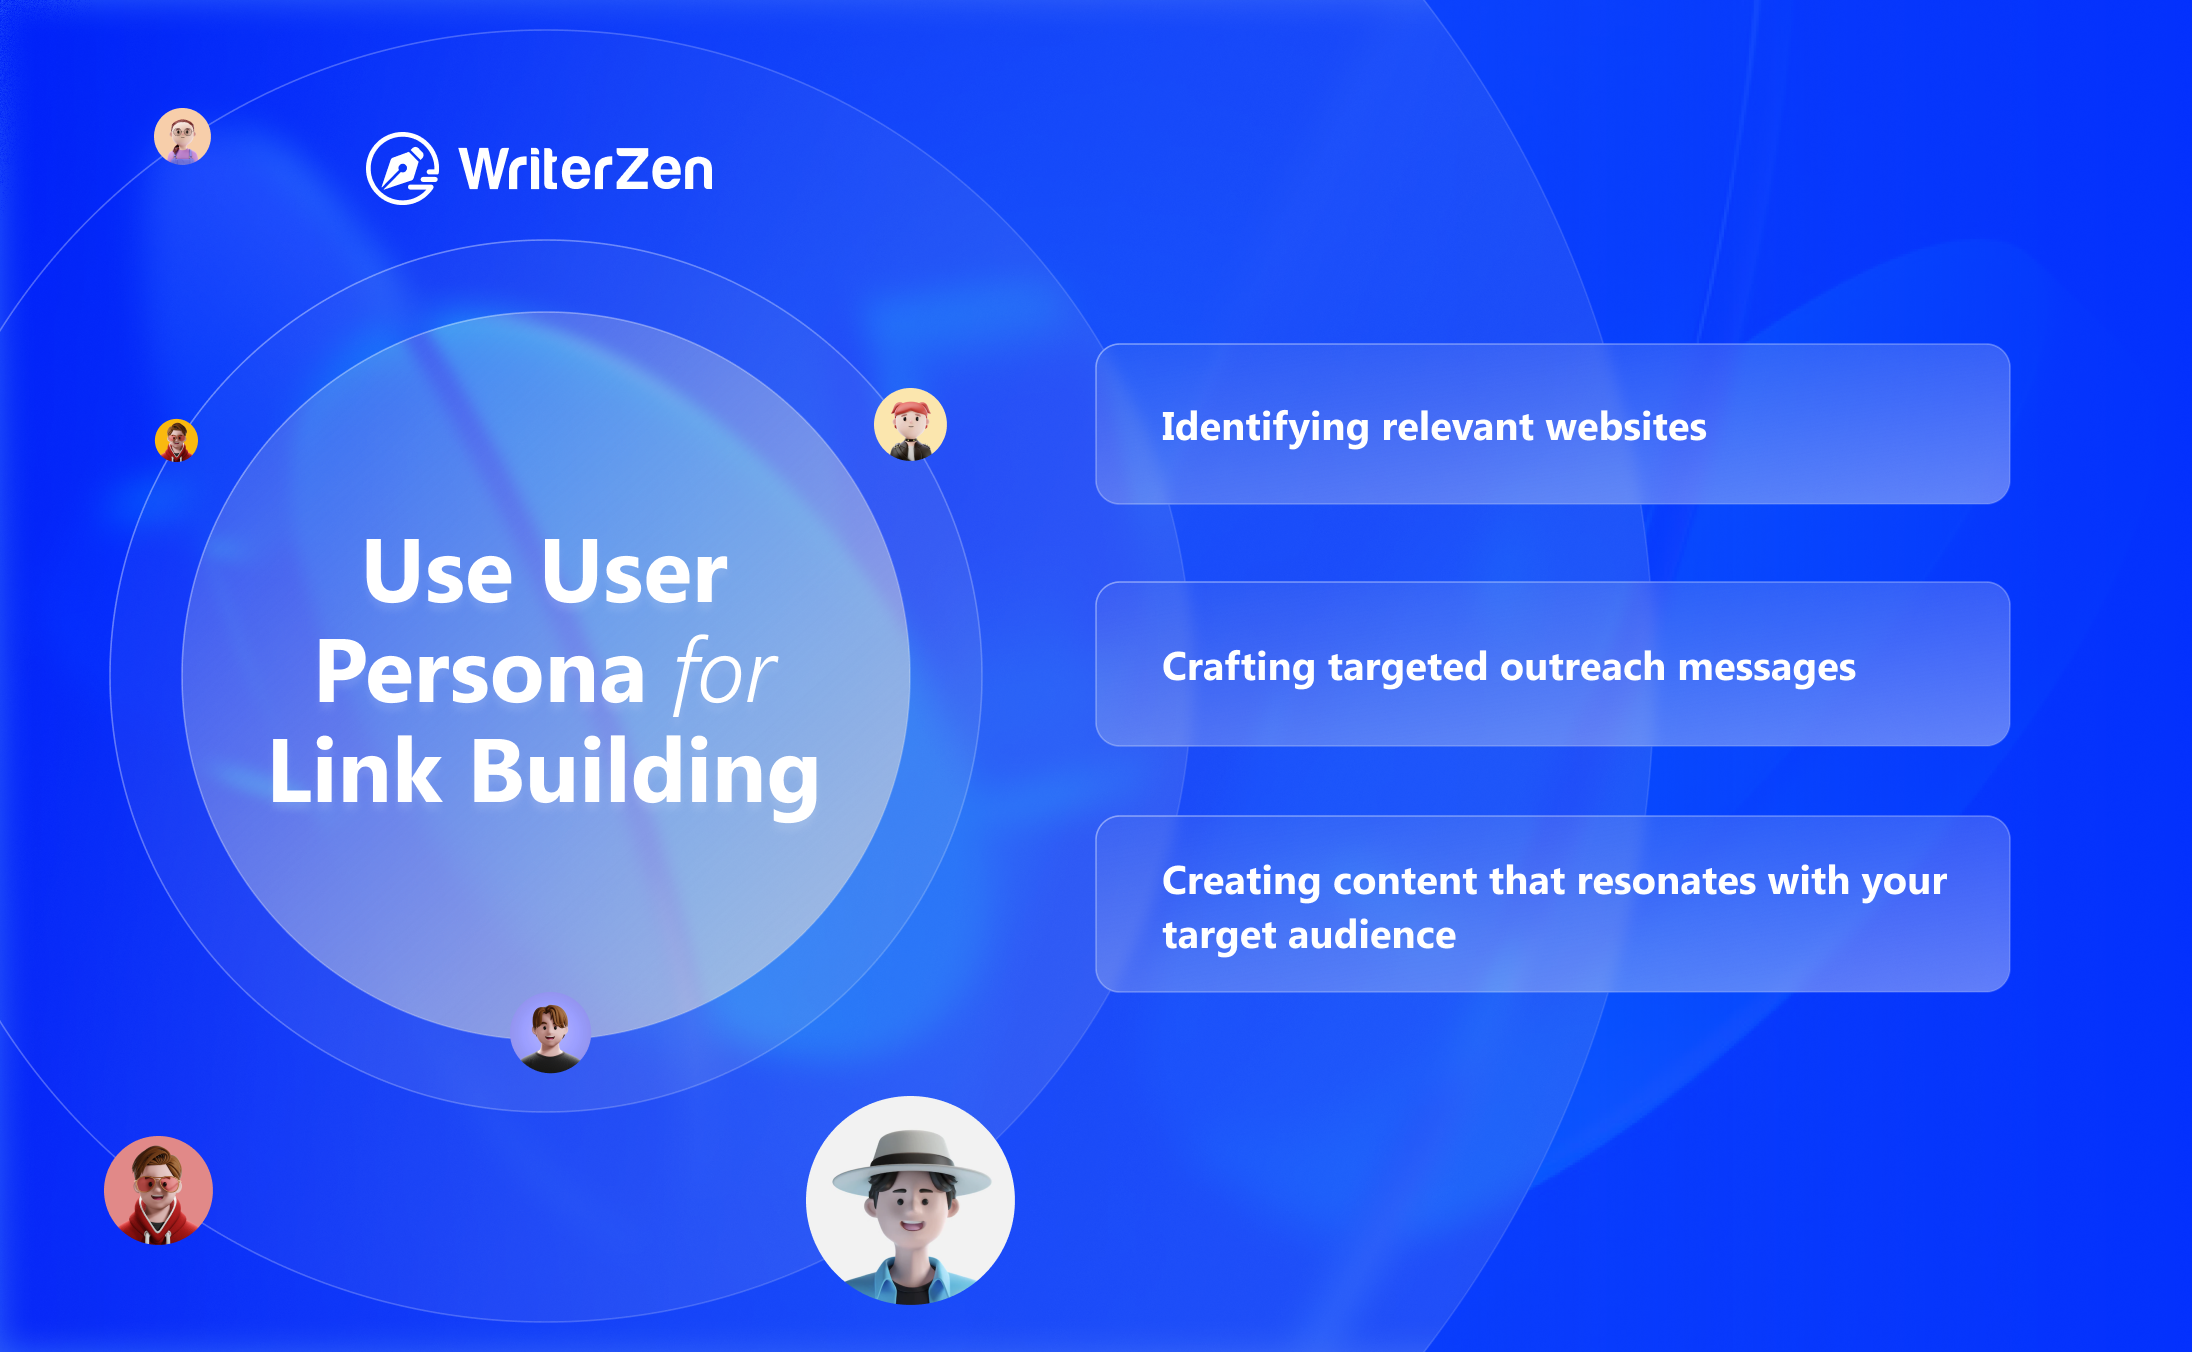 Use User Persona for Link Building